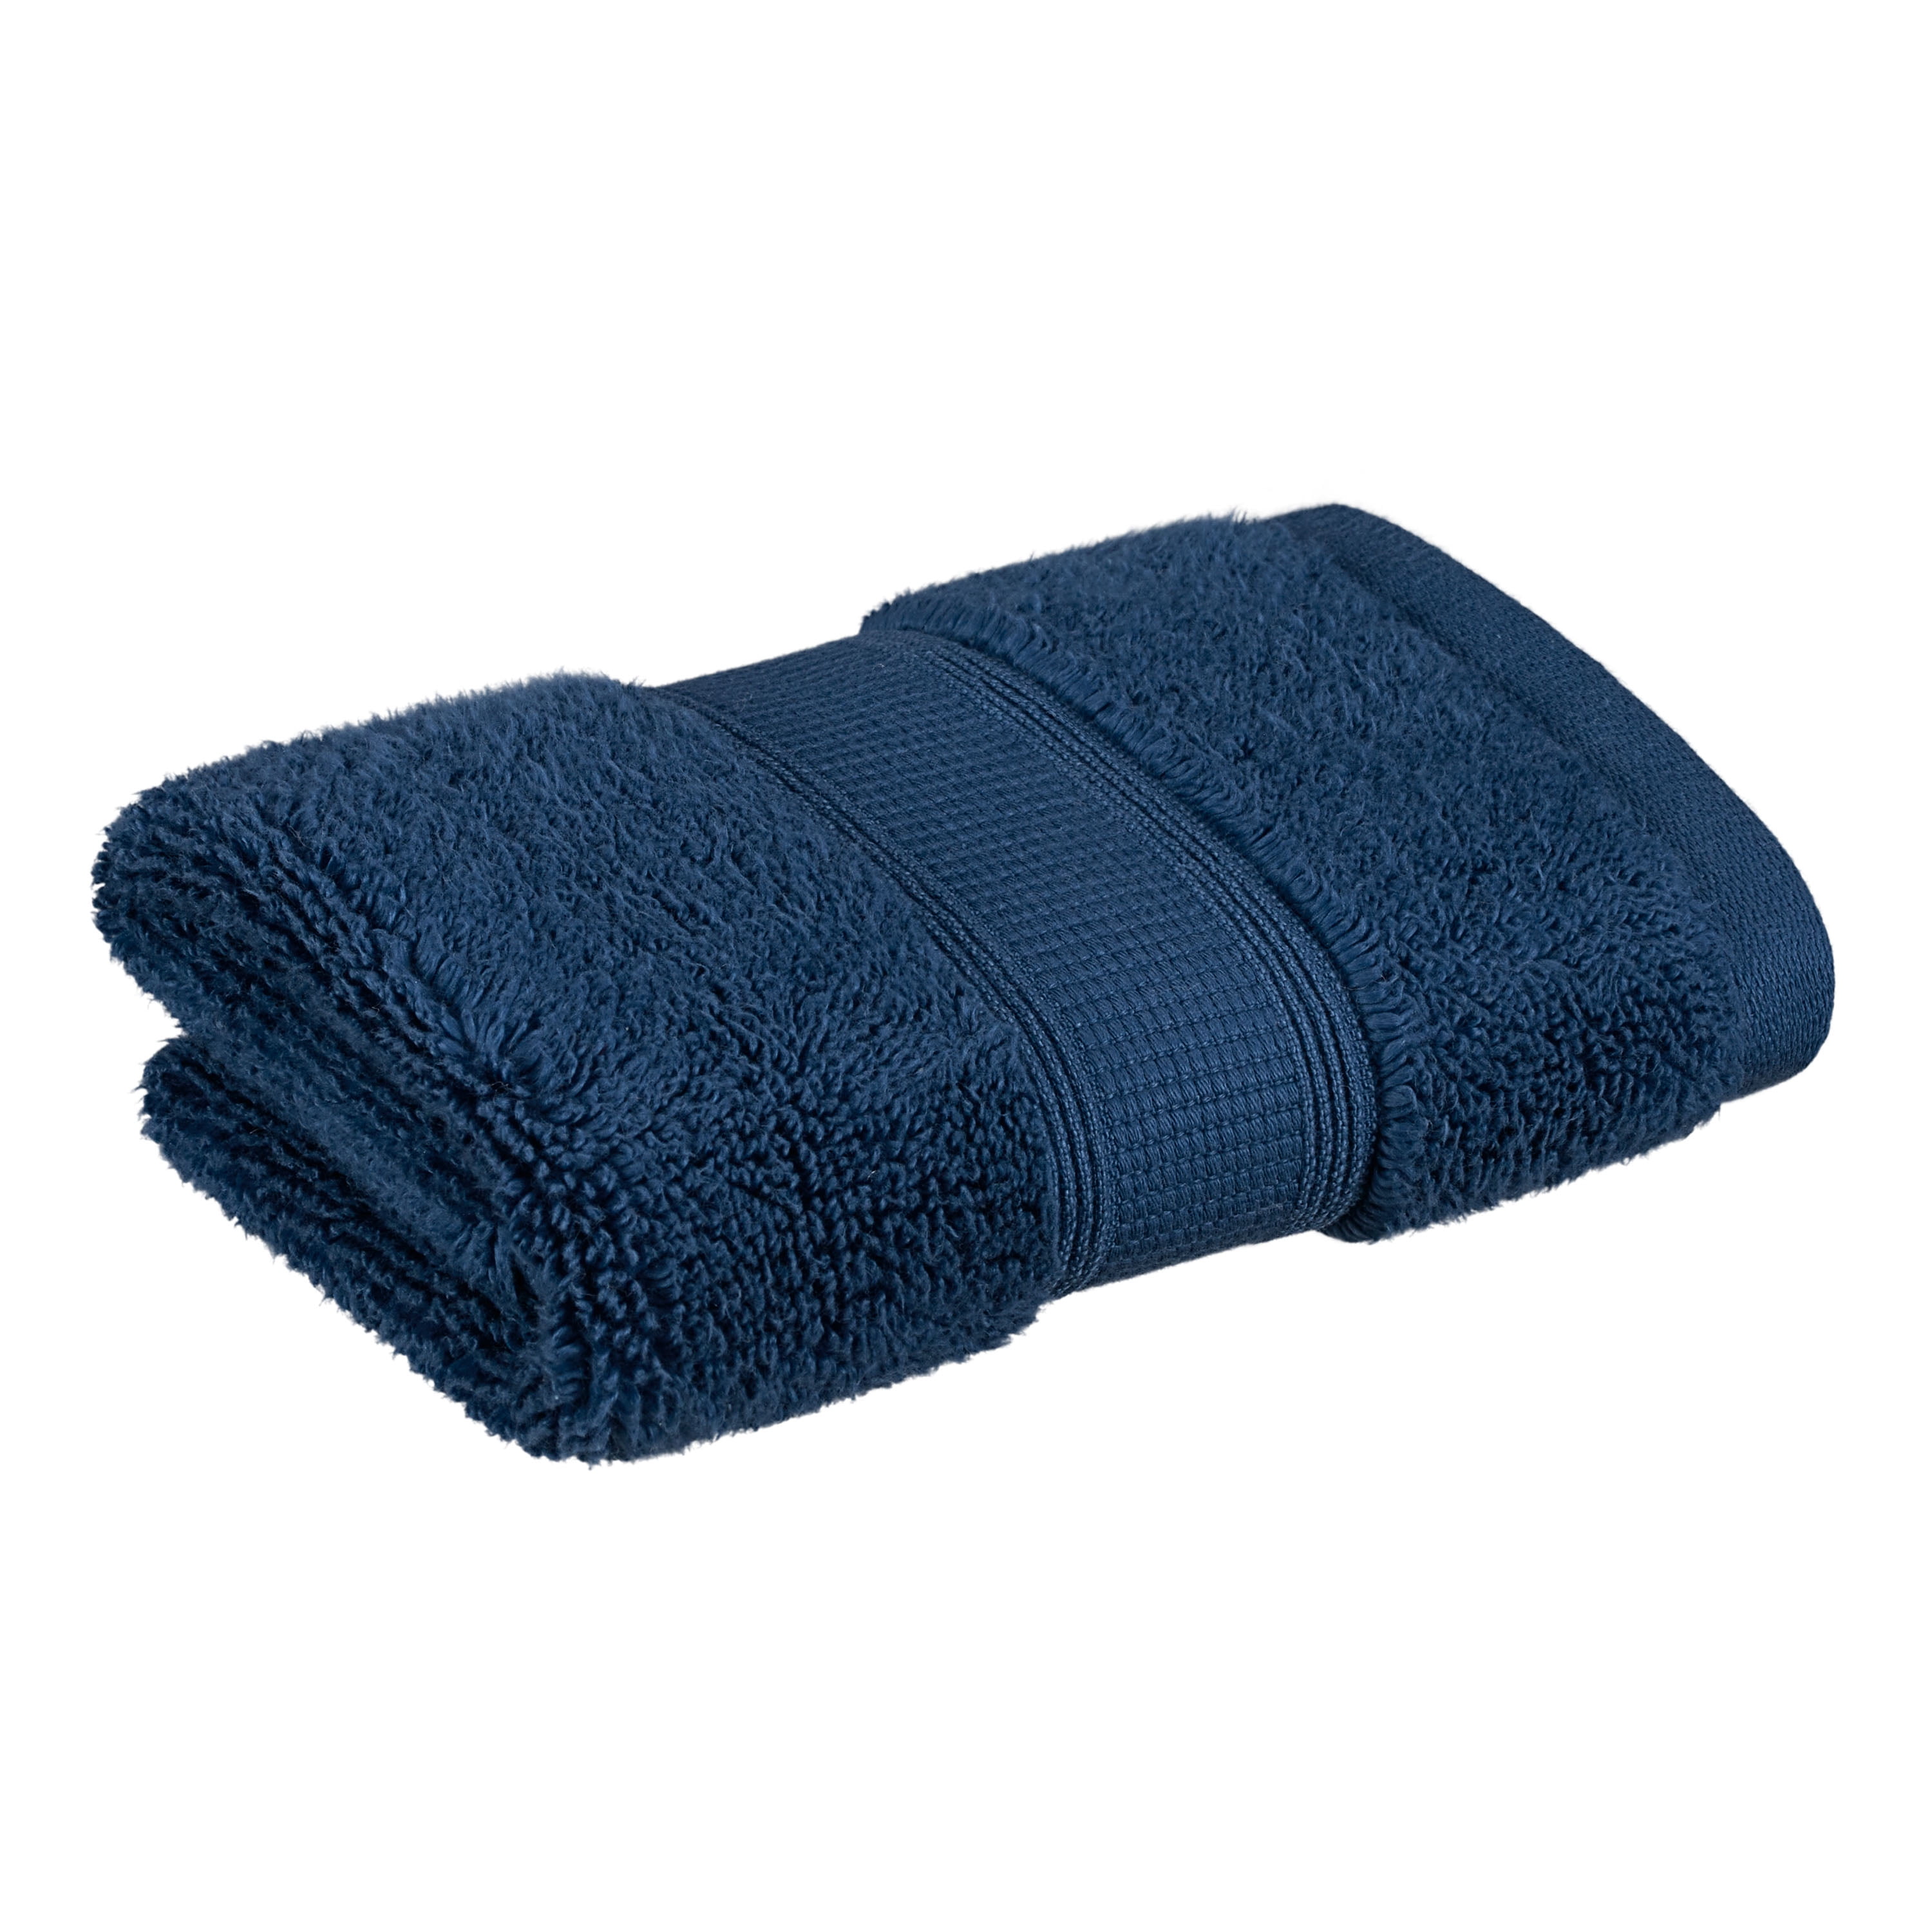 Riley Spa Towel Collection Thistle 100 % Cotton Bath Towel 30 x 58 in Navy @